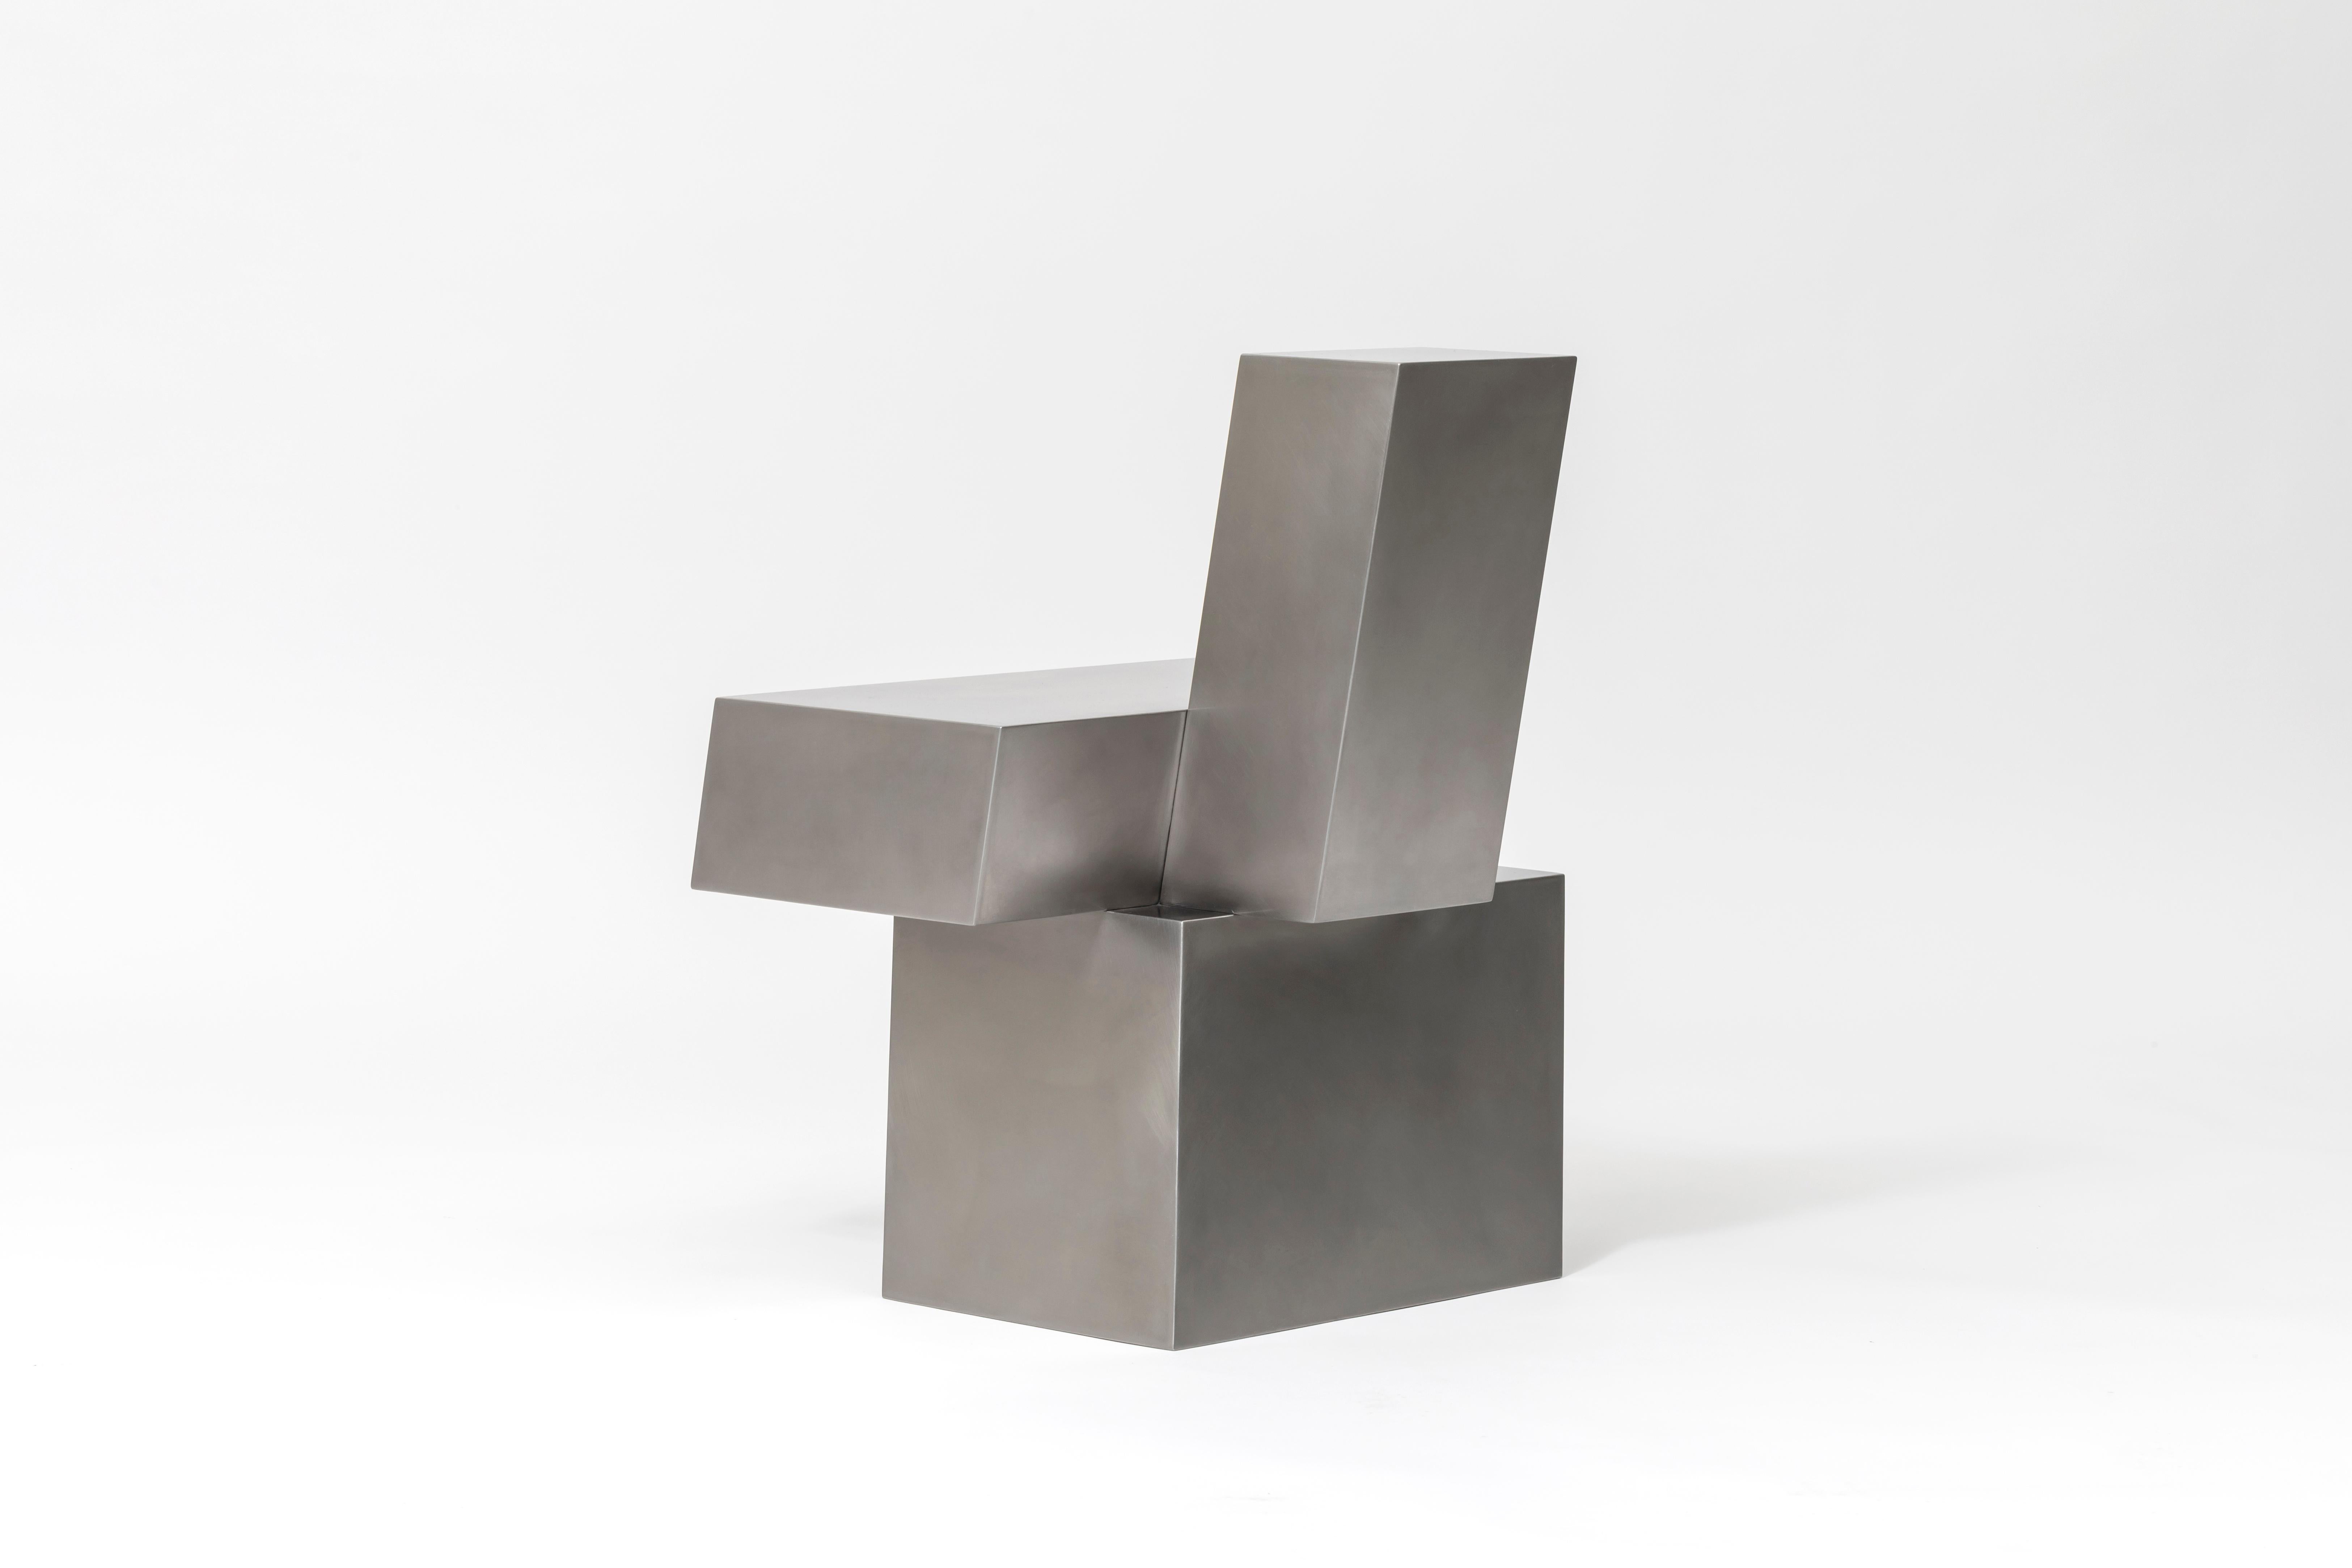 Layered steel seat by Hyungshin Hwang
2018
Dimensions: D 45 x W 51 x H 69 cm
Materials: stainless steel

Layered Series is the main theme and concept of work of Hwang, who continues his experiment which is based on architectural composition of